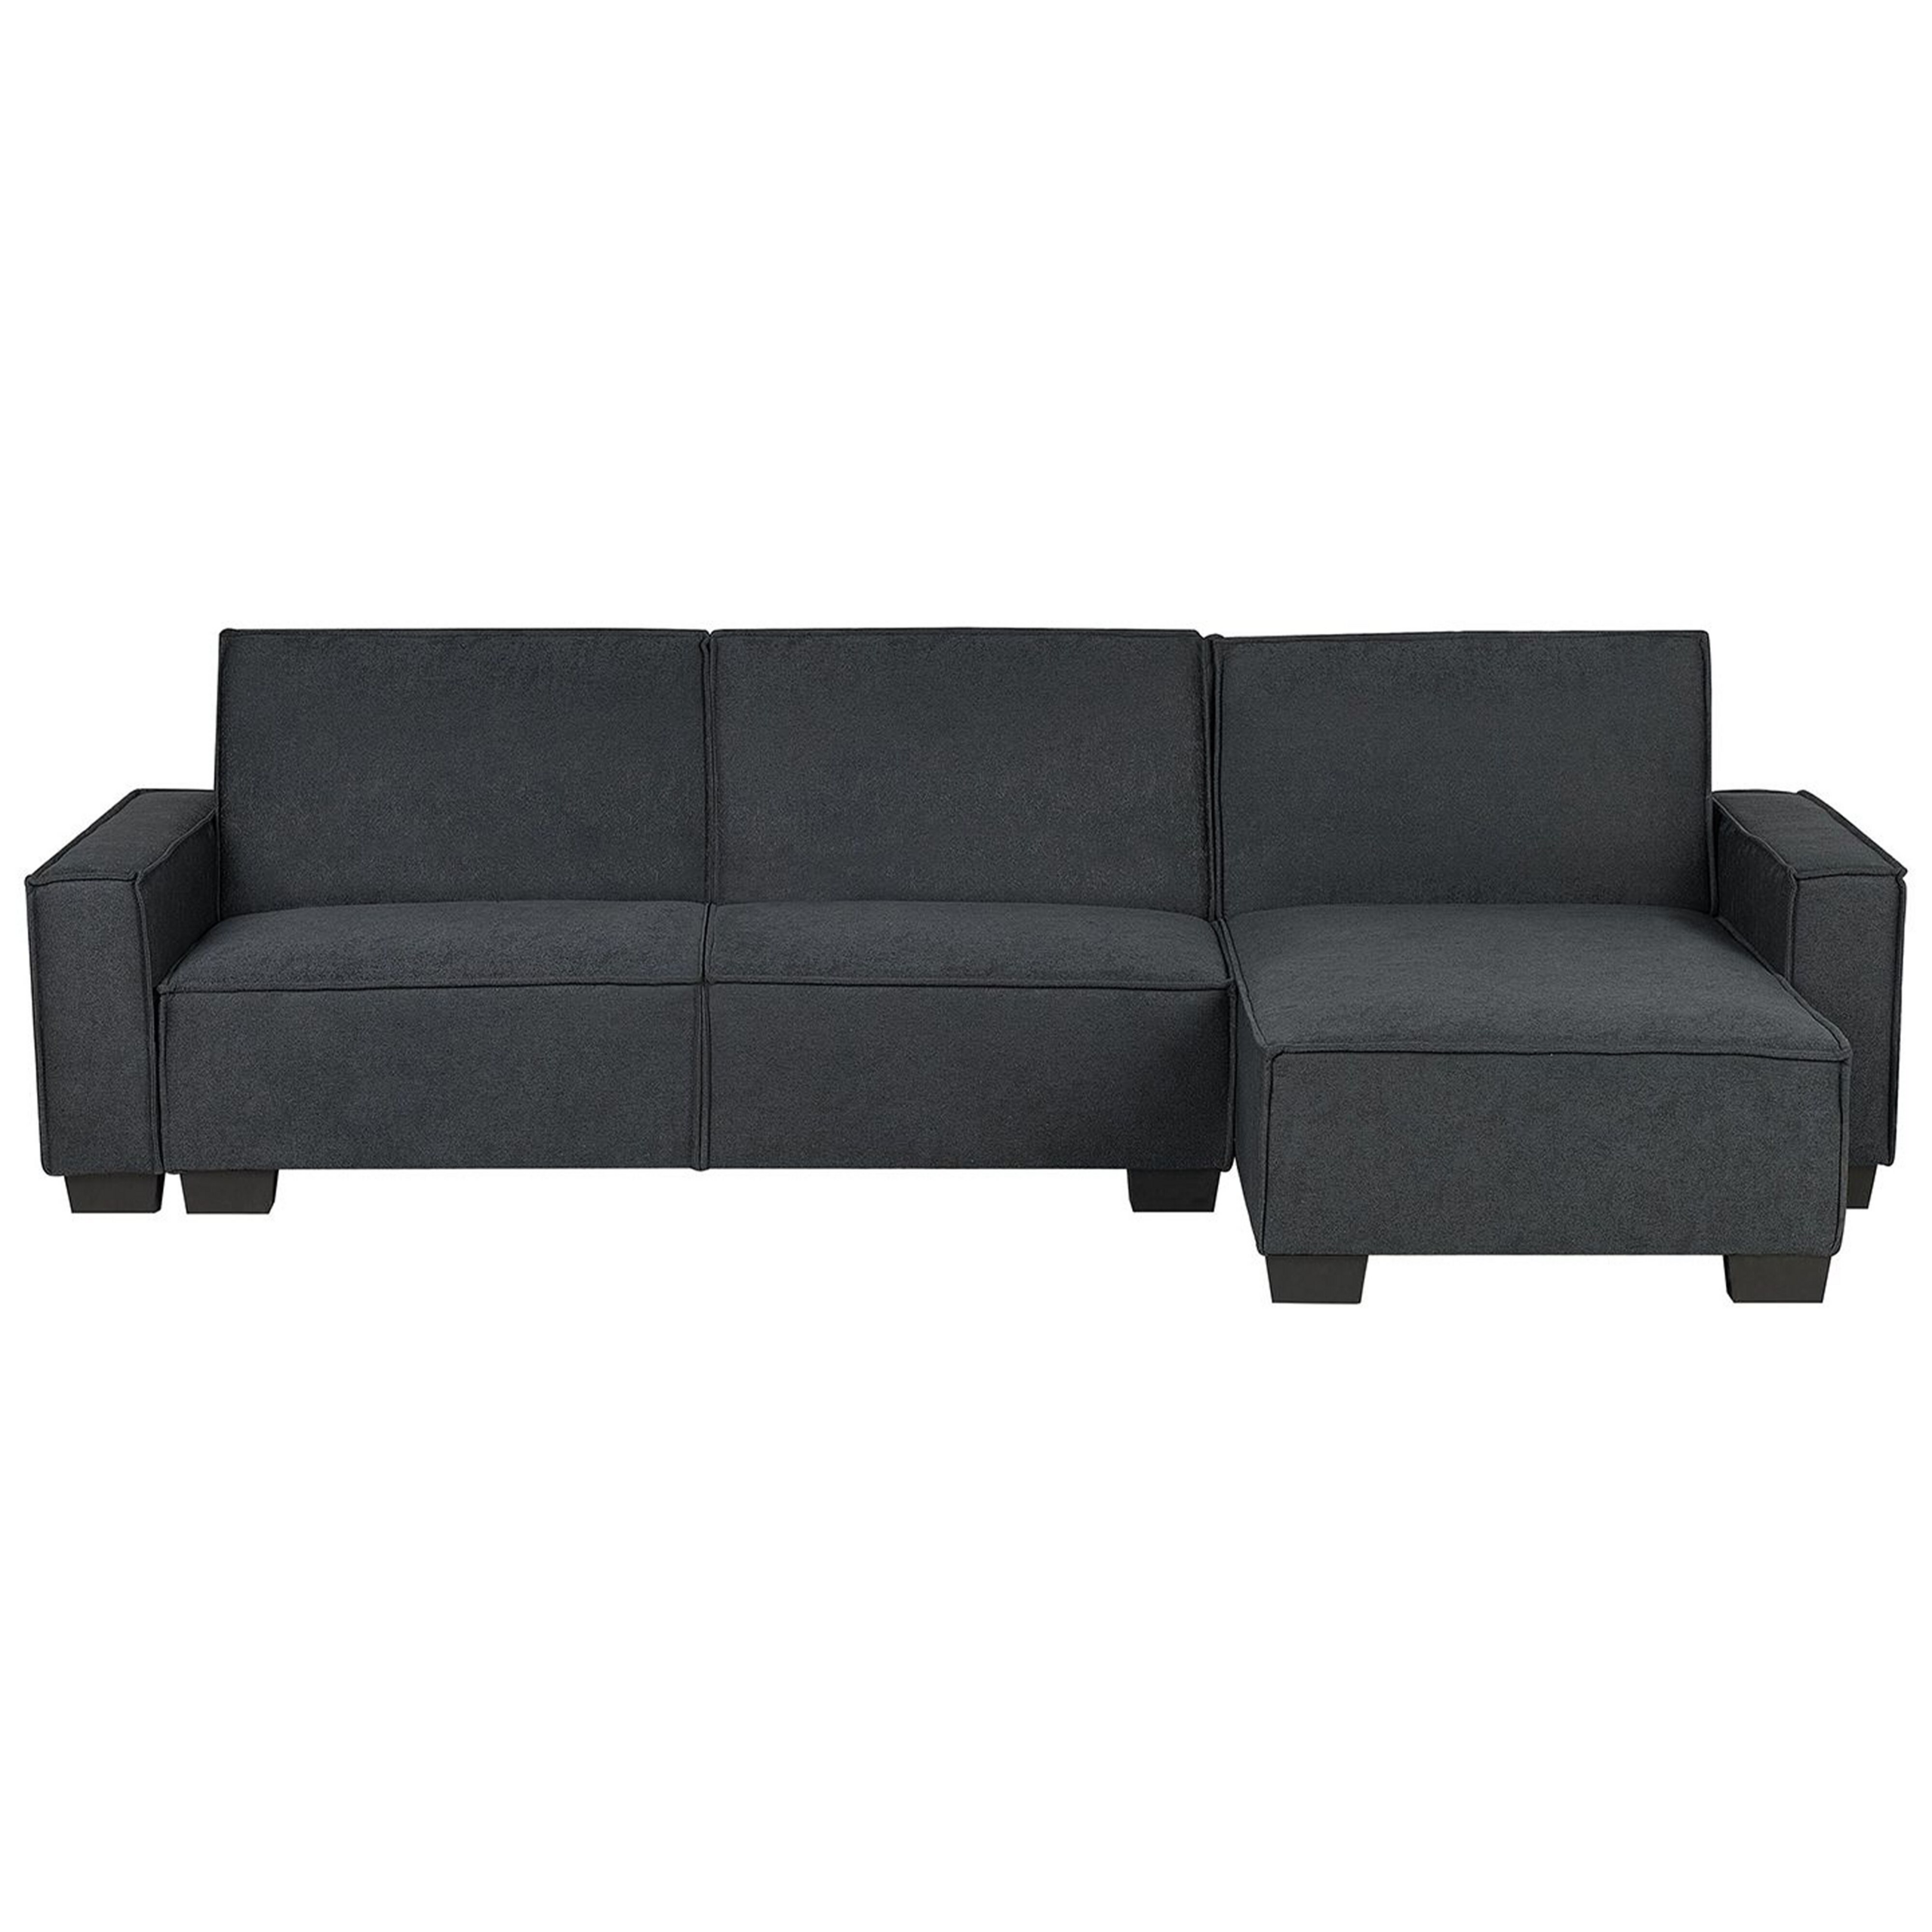 Beliani Corner Sofa Bed Graphite Grey Fabric Upholstered 3 Seater Left Hand L-Shaped Bed